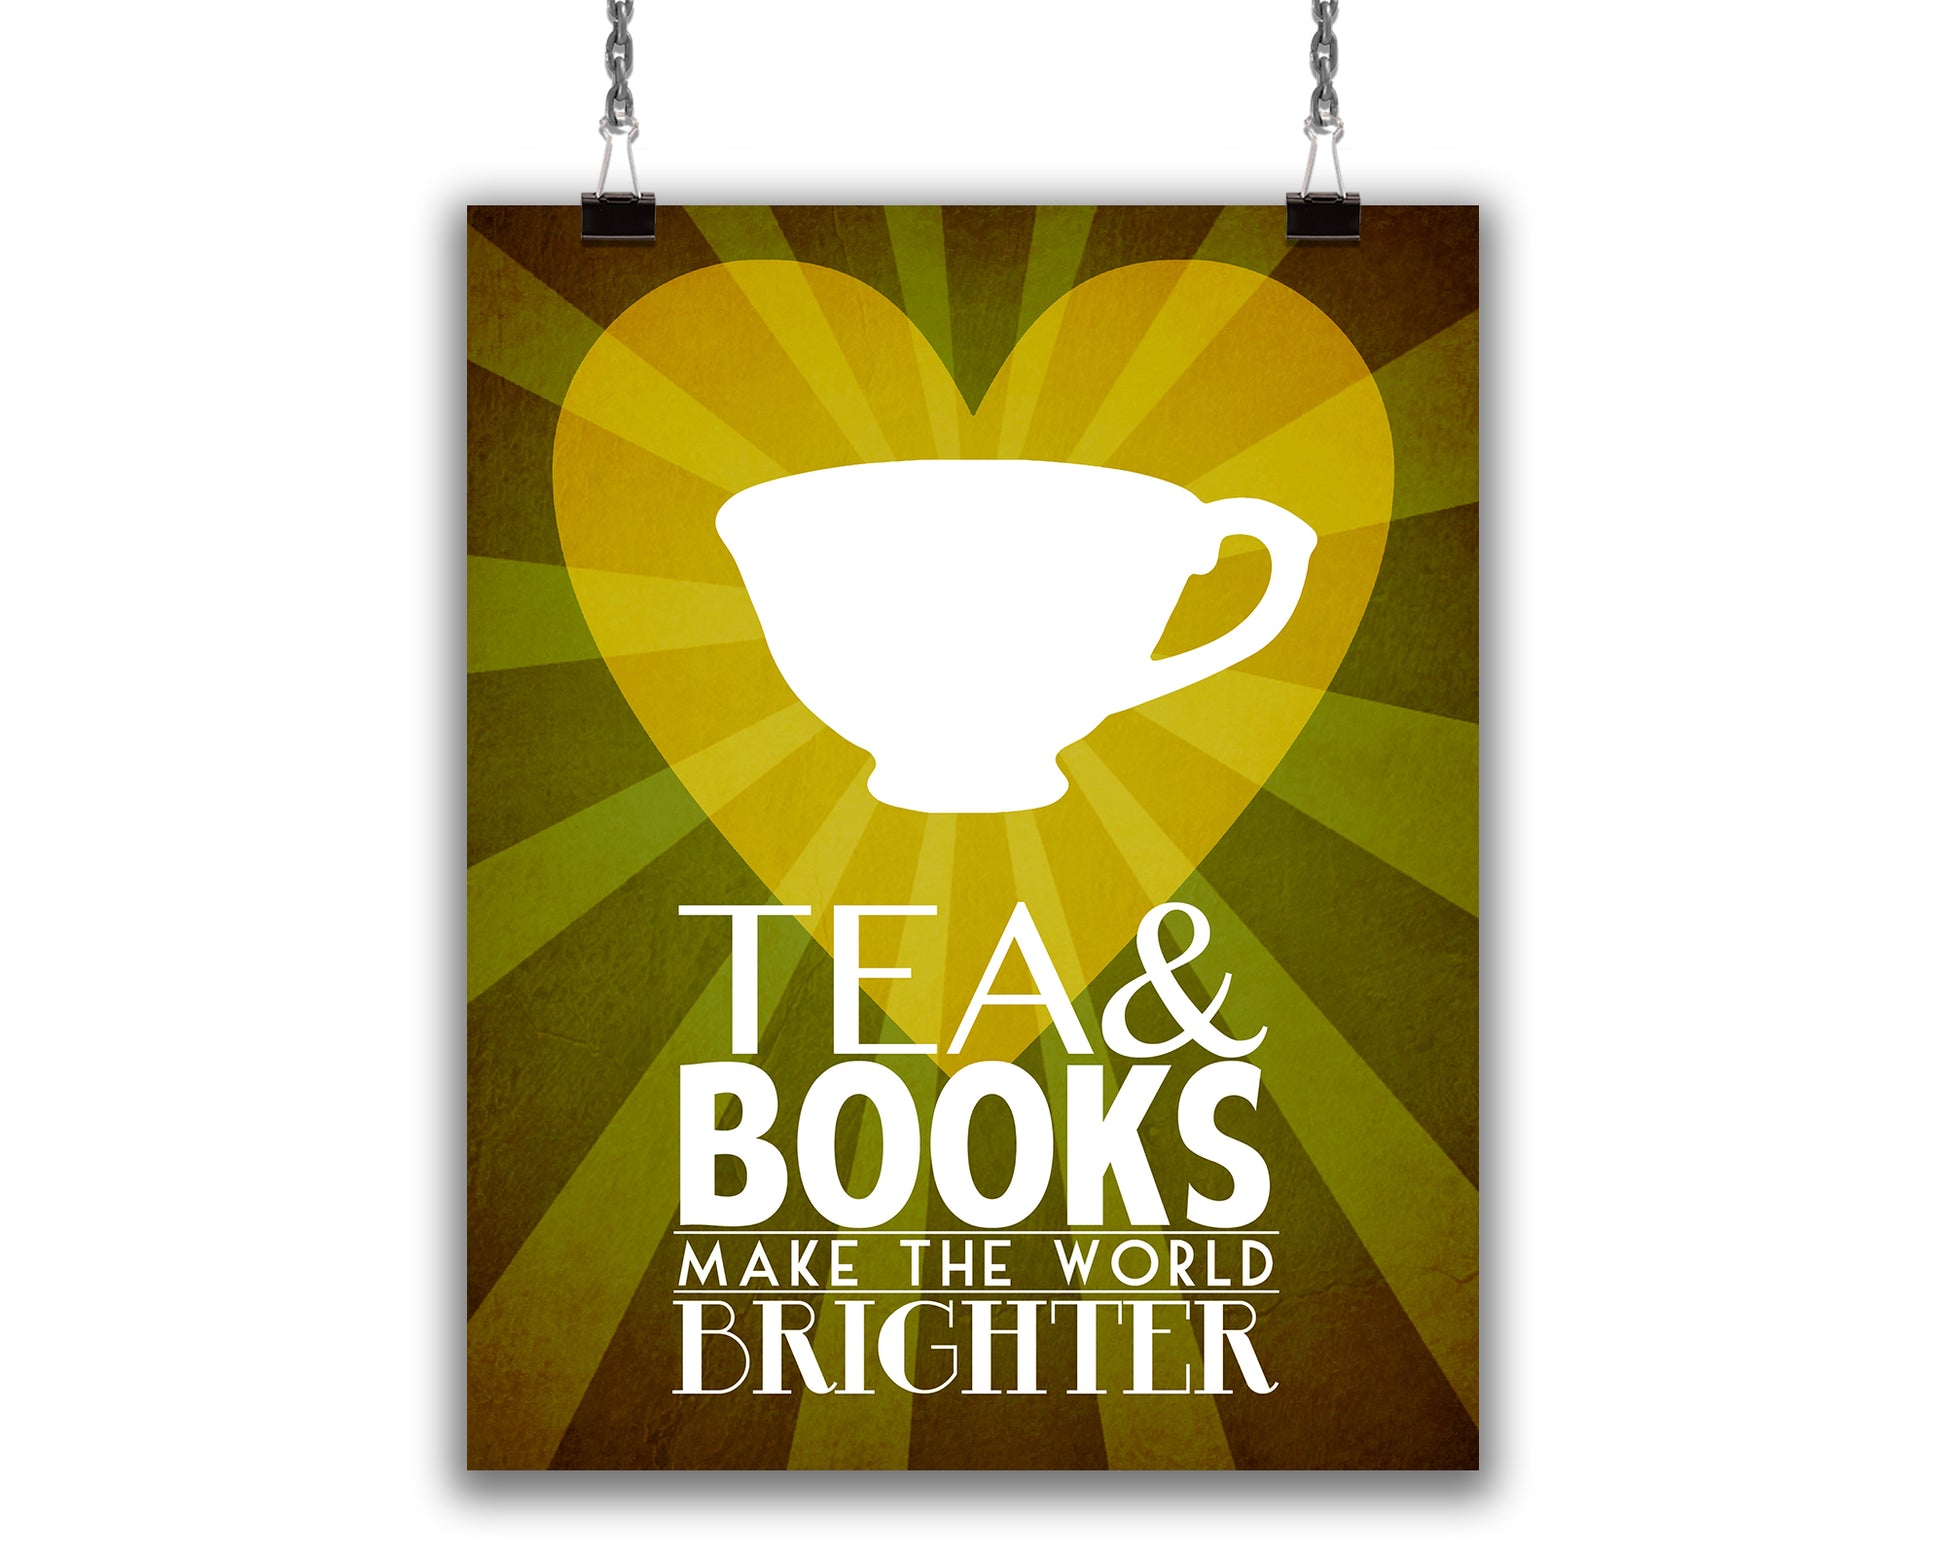 Art Print for bookworms and librarians with tea cup illustration and text reading "Tea & Books Make The World Bright"